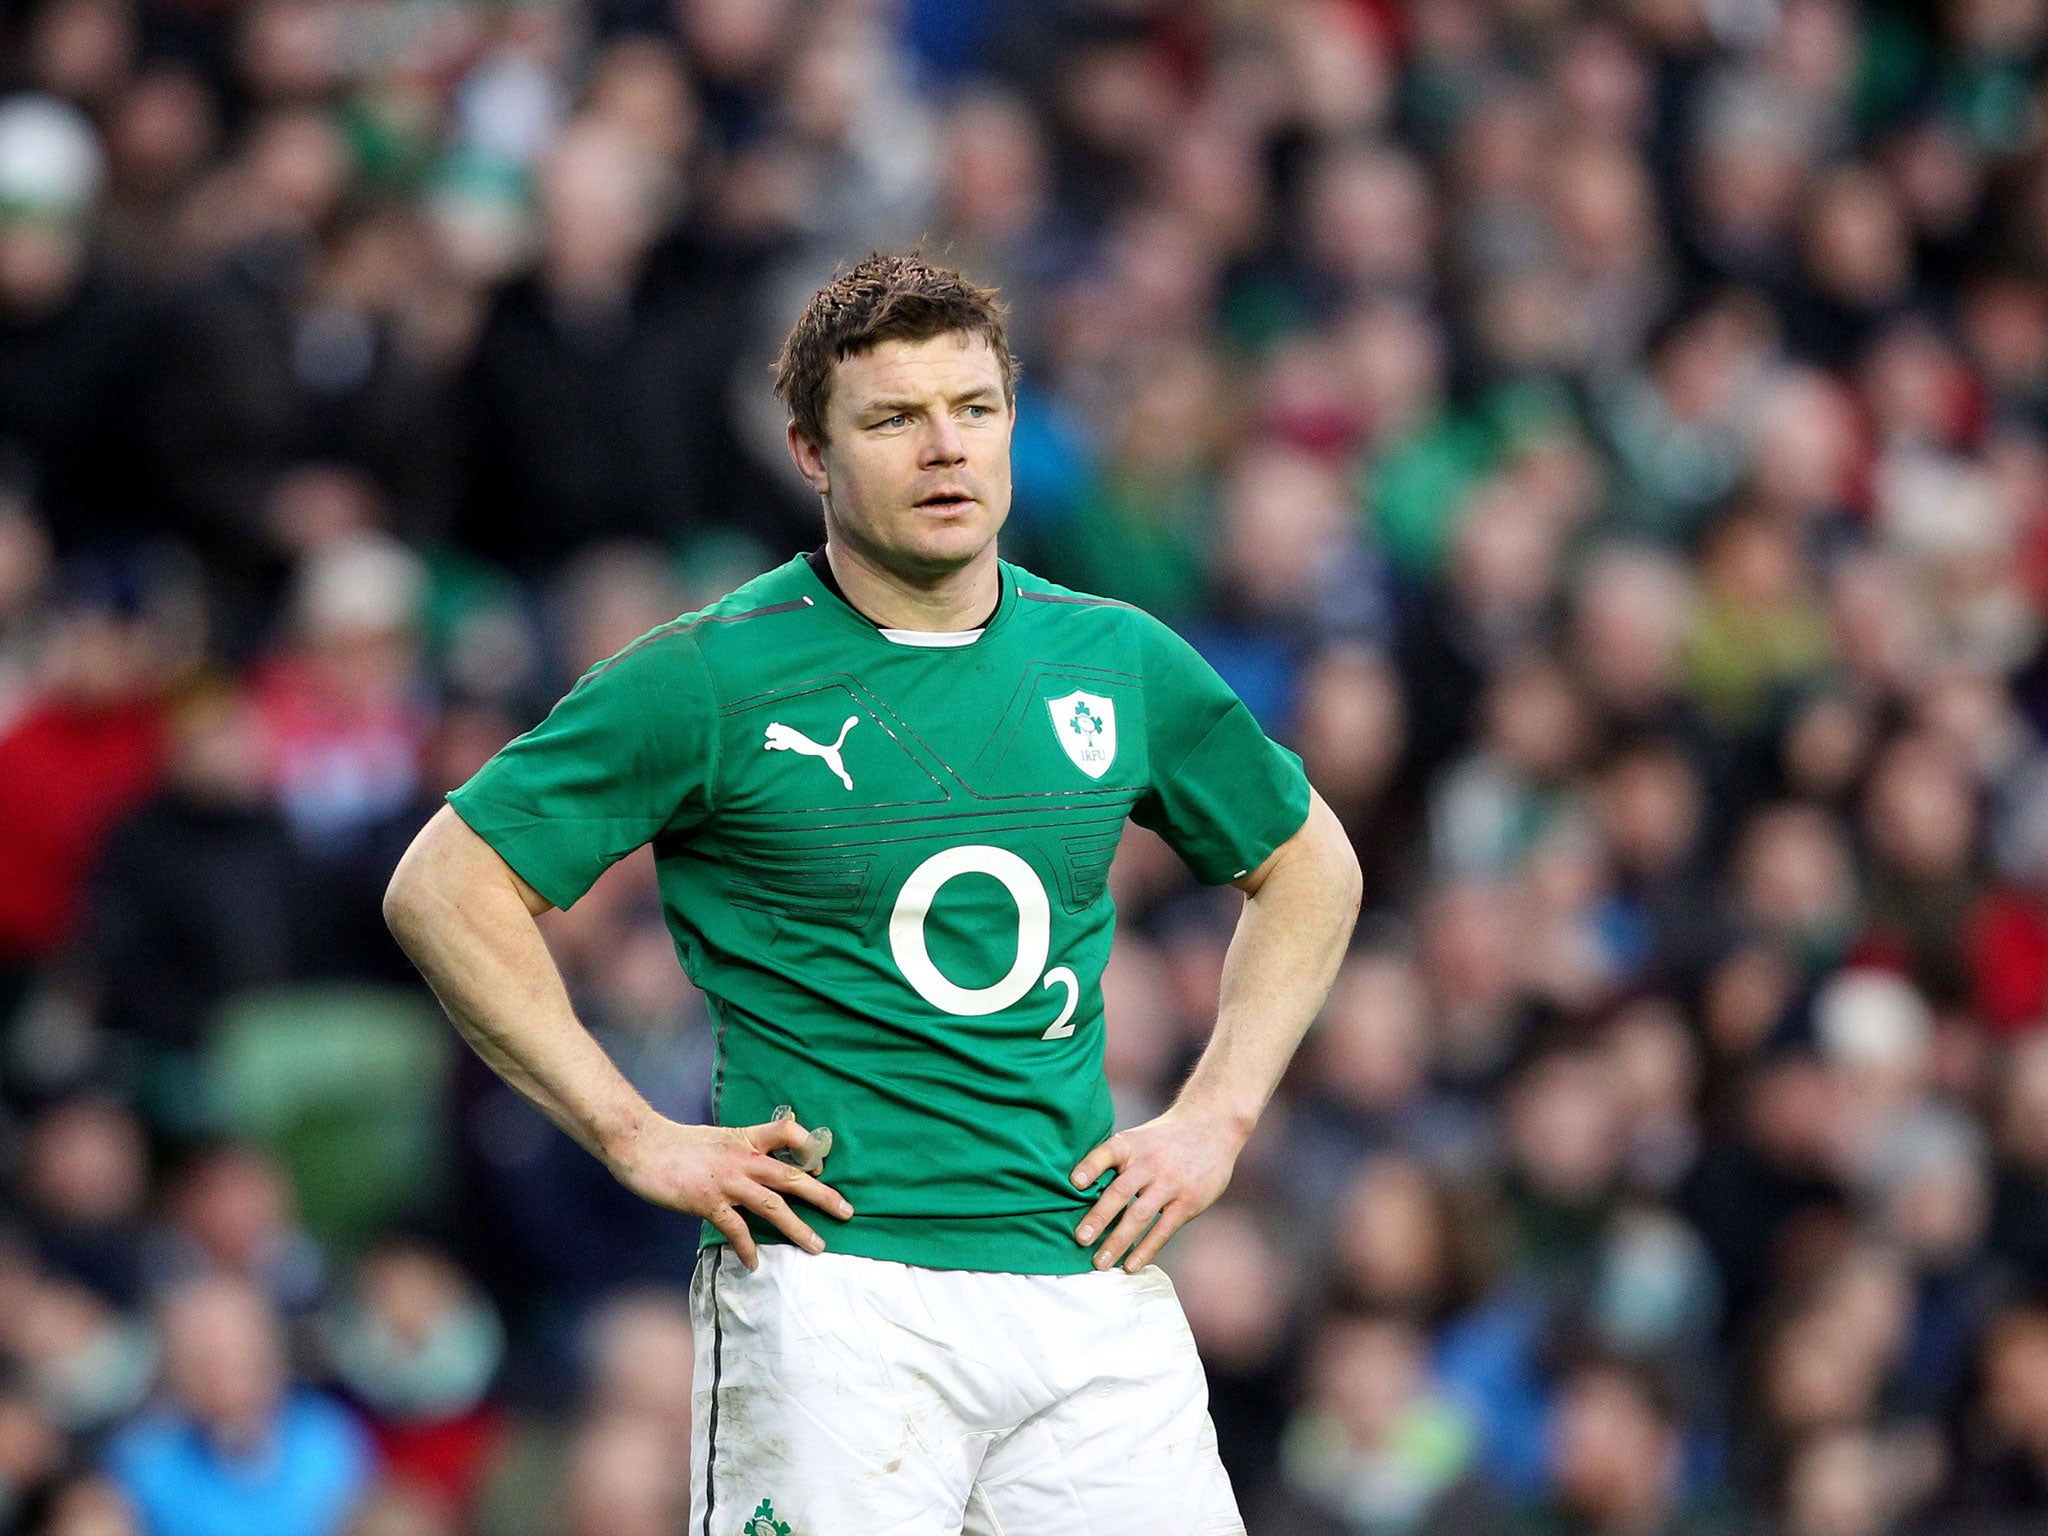 Brian O'Driscoll has been praised by his Ireland head coach Joe Schmidt following the victory over Scotland